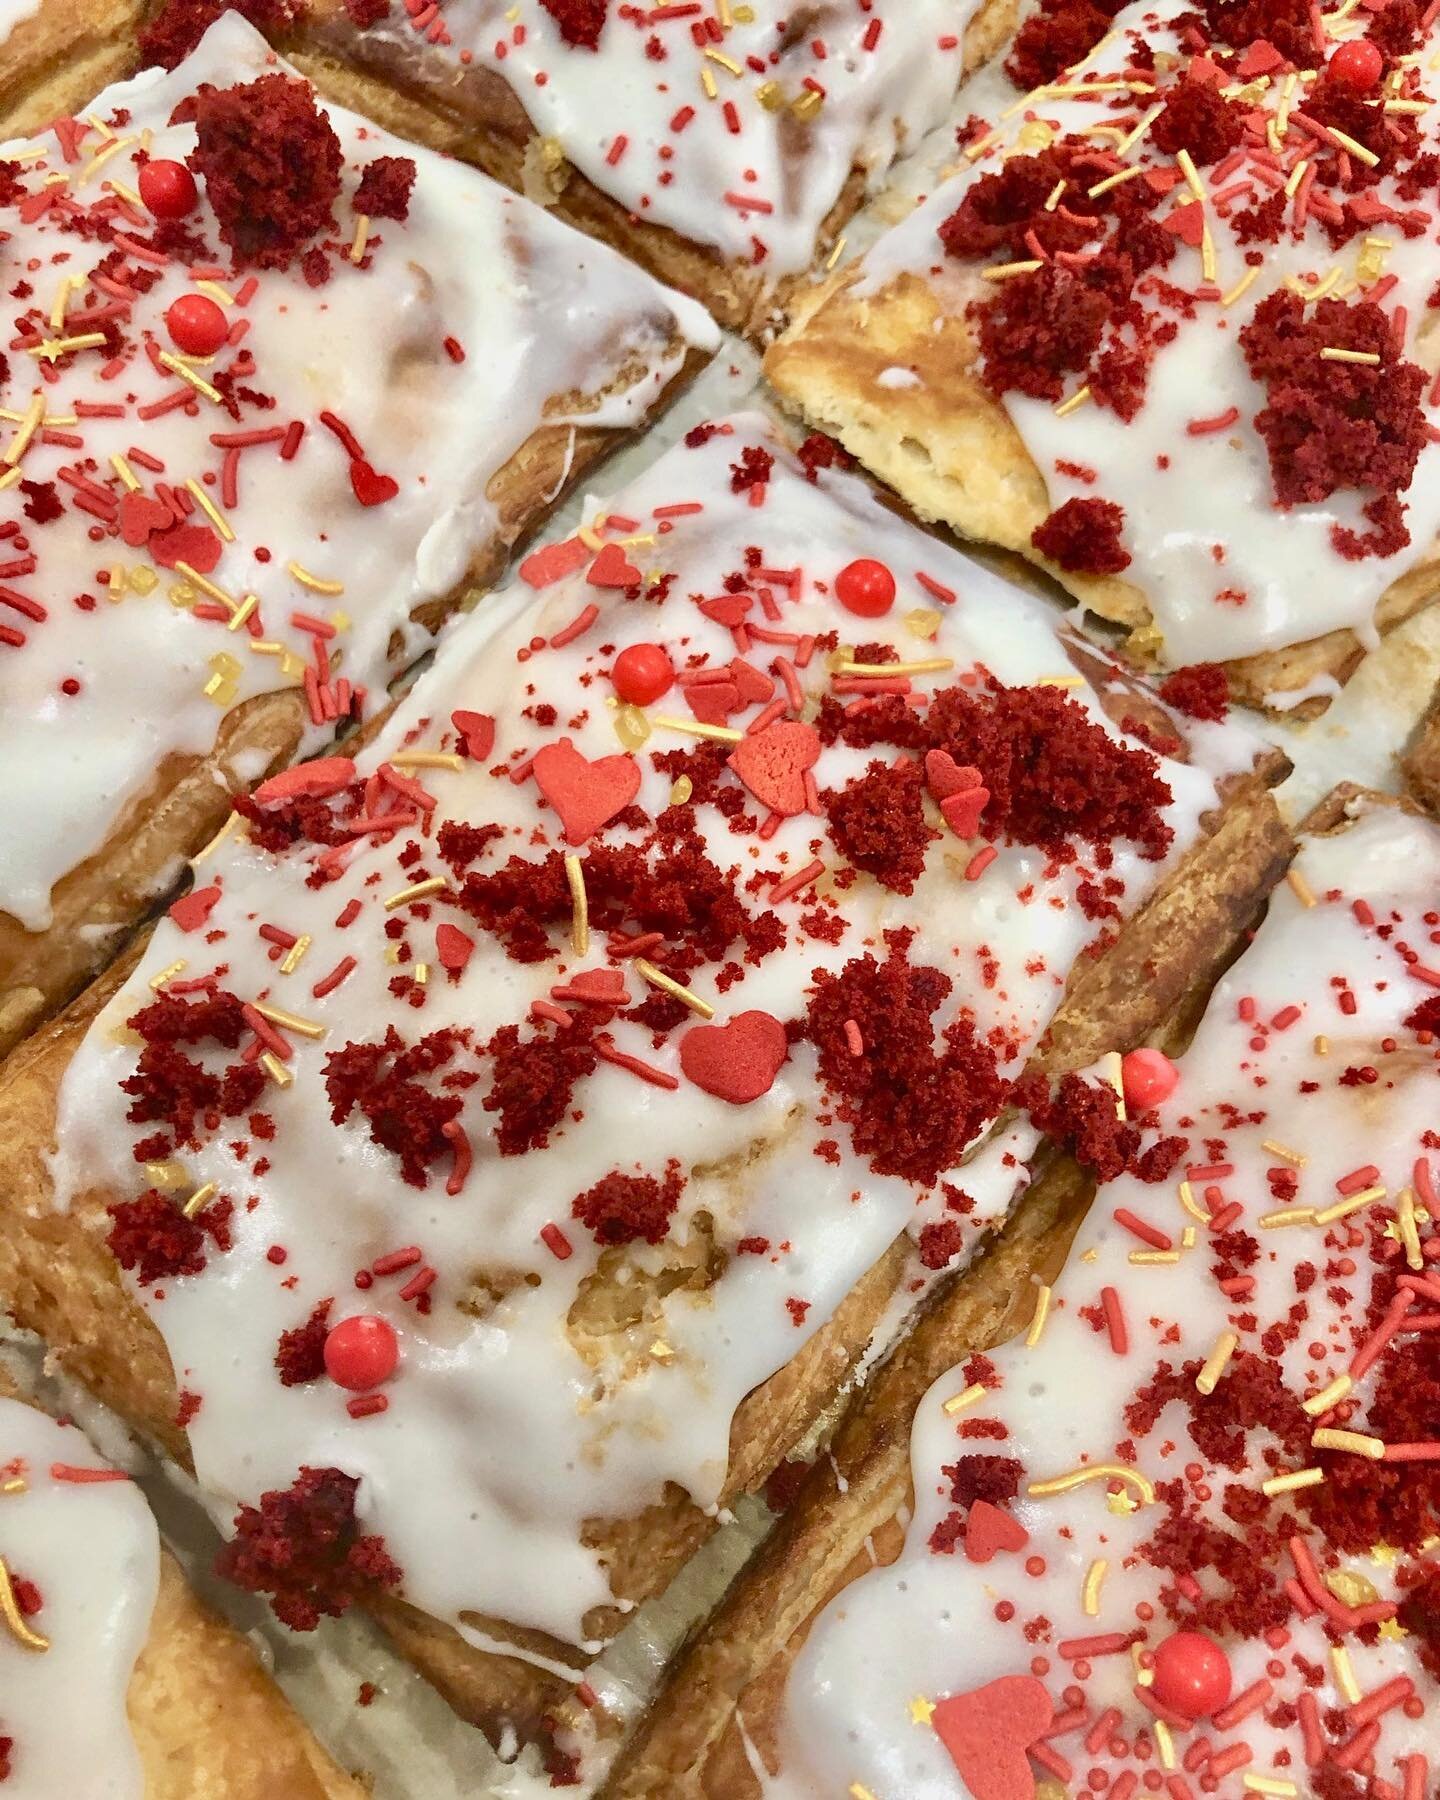 Getting in the mood 😋😍😳 Red Velvet Pop-Tarts will be back for Valentine&rsquo;s Day! We&rsquo;ll be working on listing these on the website this week so you can pre-order them 💕 if you&rsquo;re not signed up for emails already, hit the link in bi